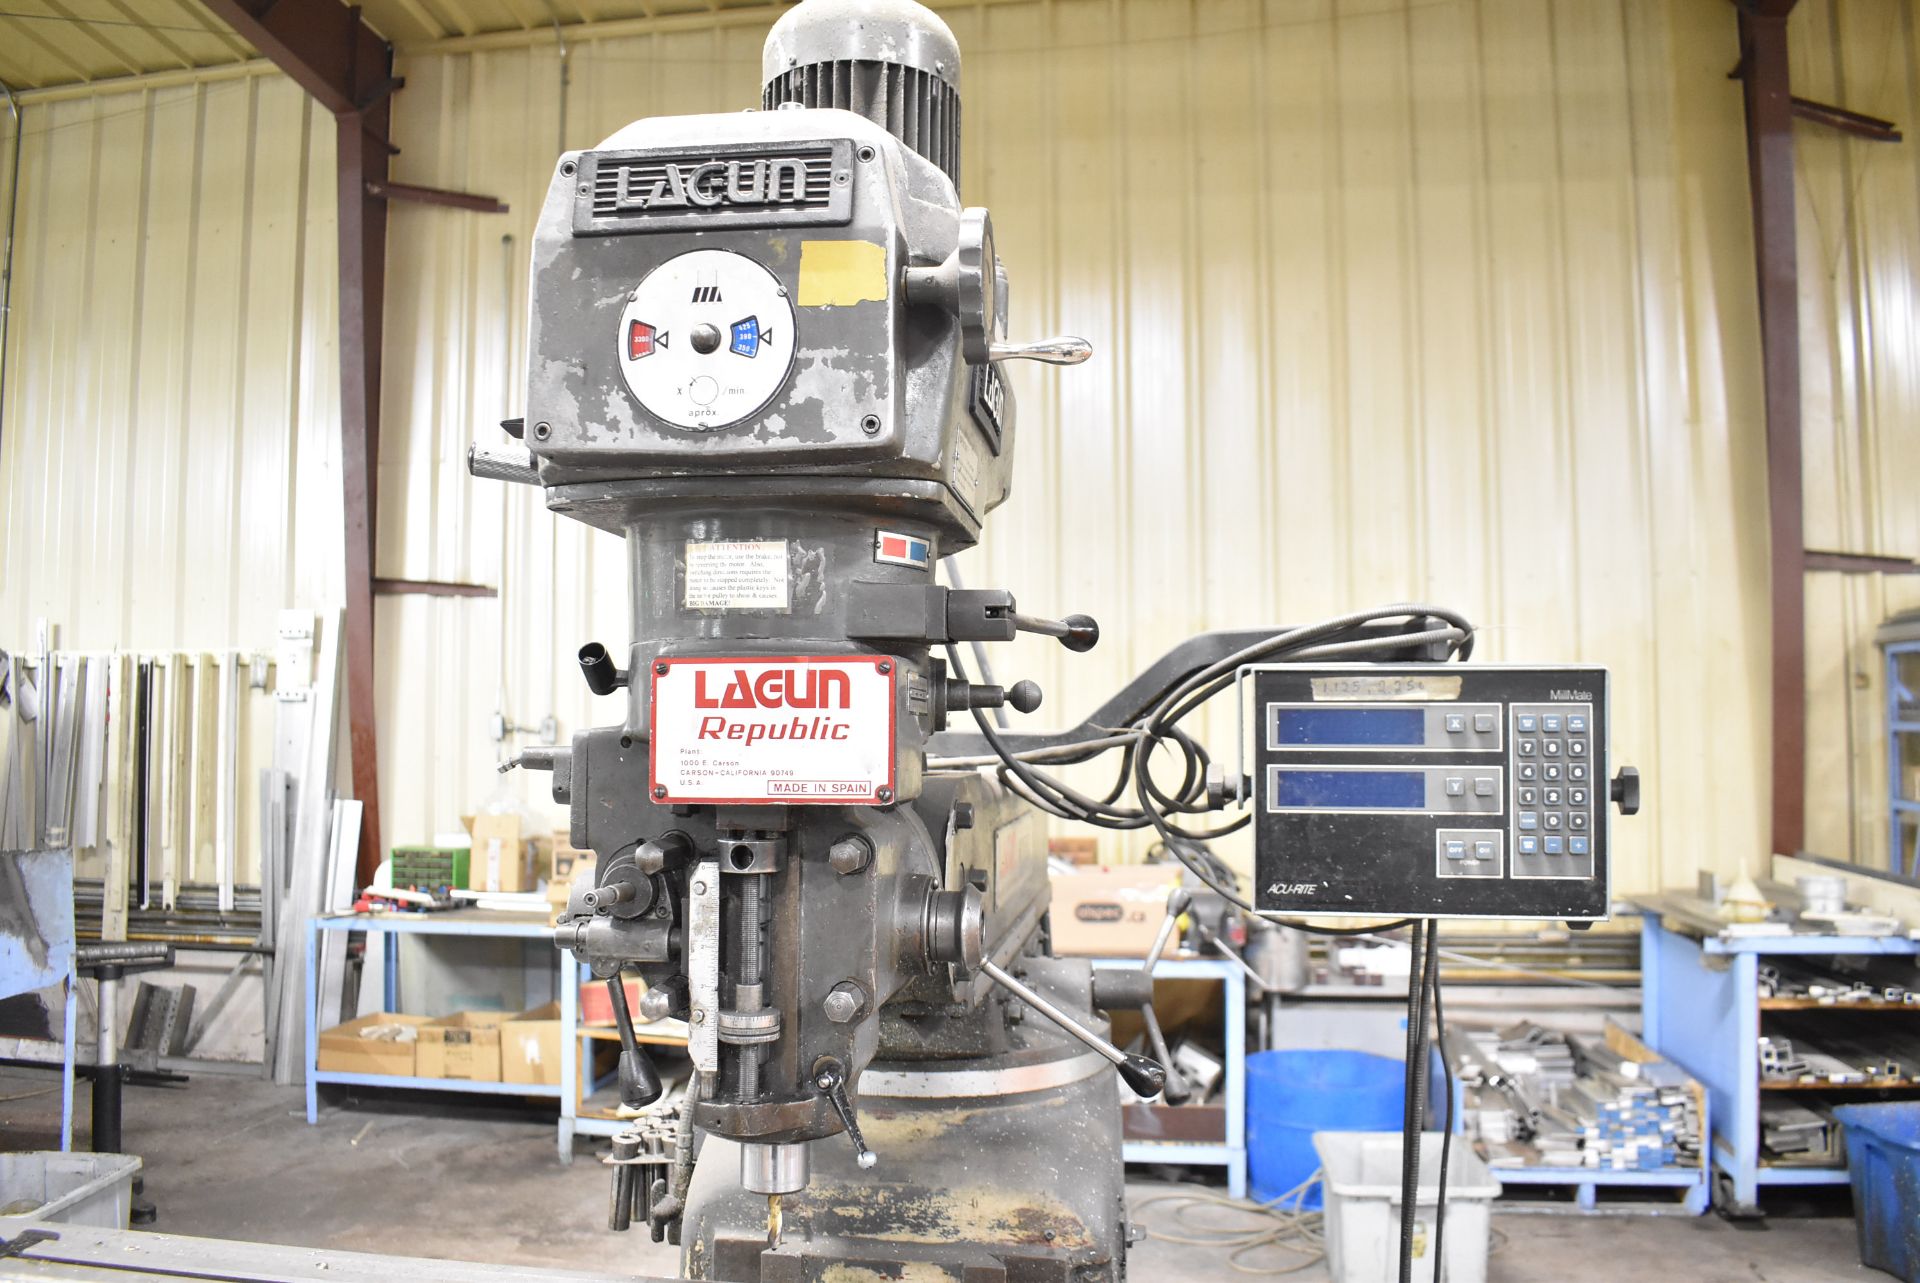 LAGUN FTV-2-E VERTICAL TURRET MILL WITH ACU-RITE 2 AXIS DRO, SPEEDS TO 4200RPM, 47" X 11" T-SLOT - Image 3 of 10